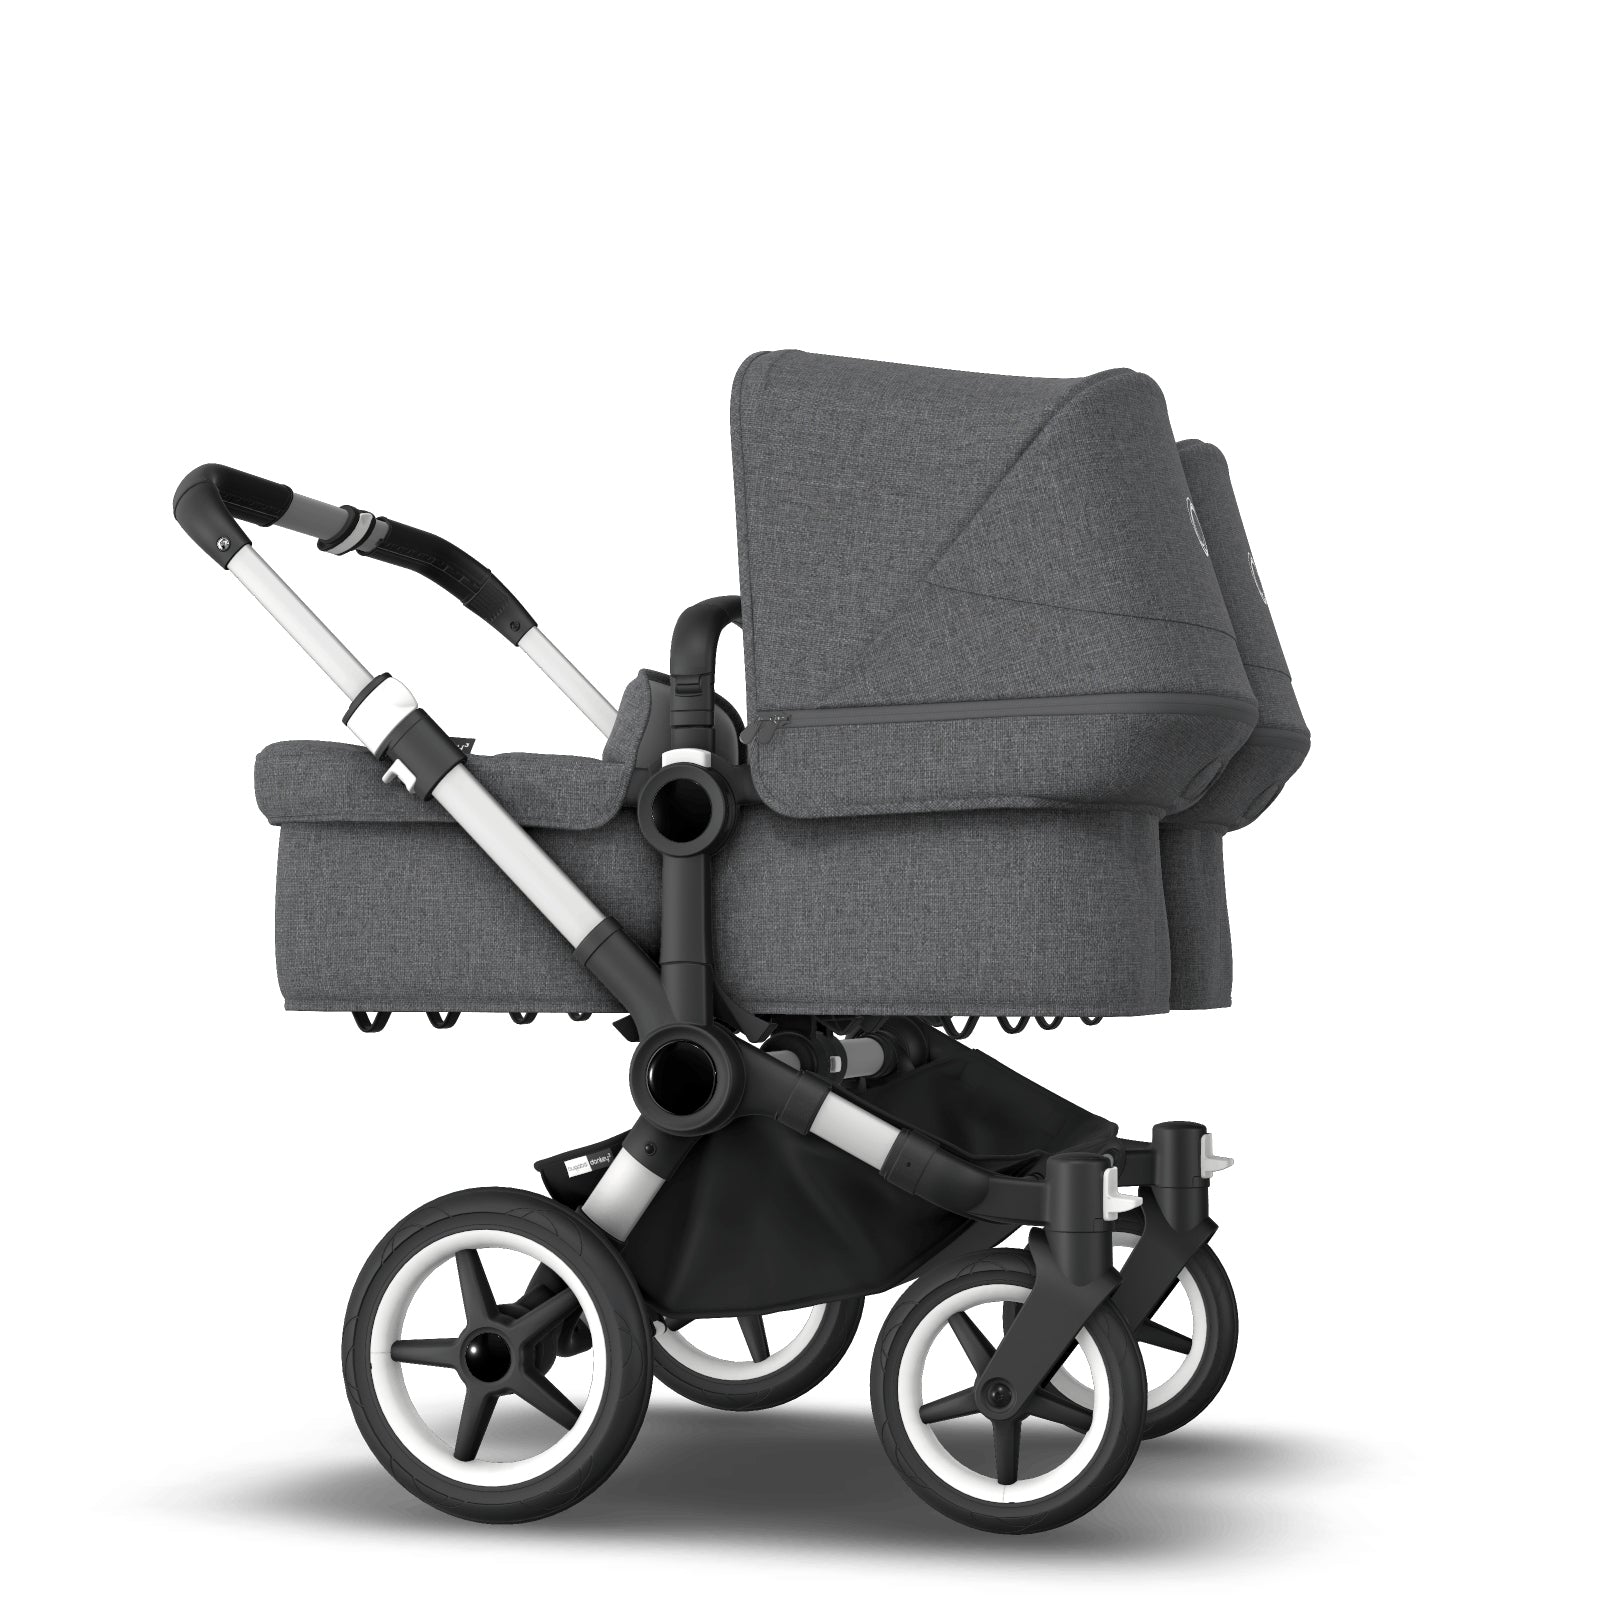 Bugaboo Donkey 3 Twin Seat and Carrycot Pushchair - Grey Melange